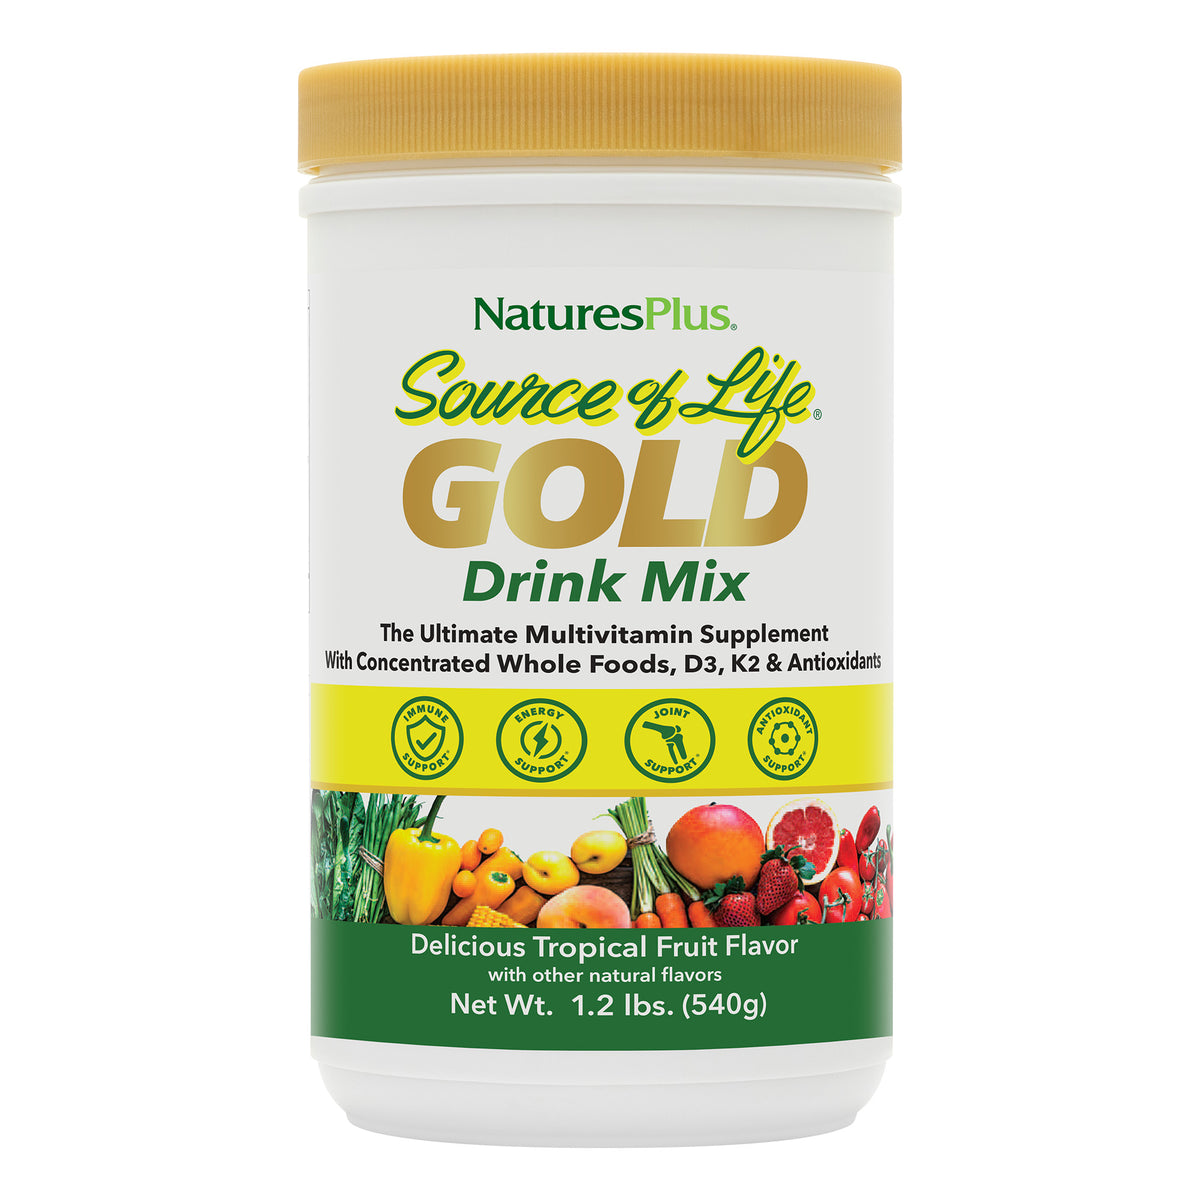 product image of Source of Life® GOLD Drink Mix containing 1.20 LB